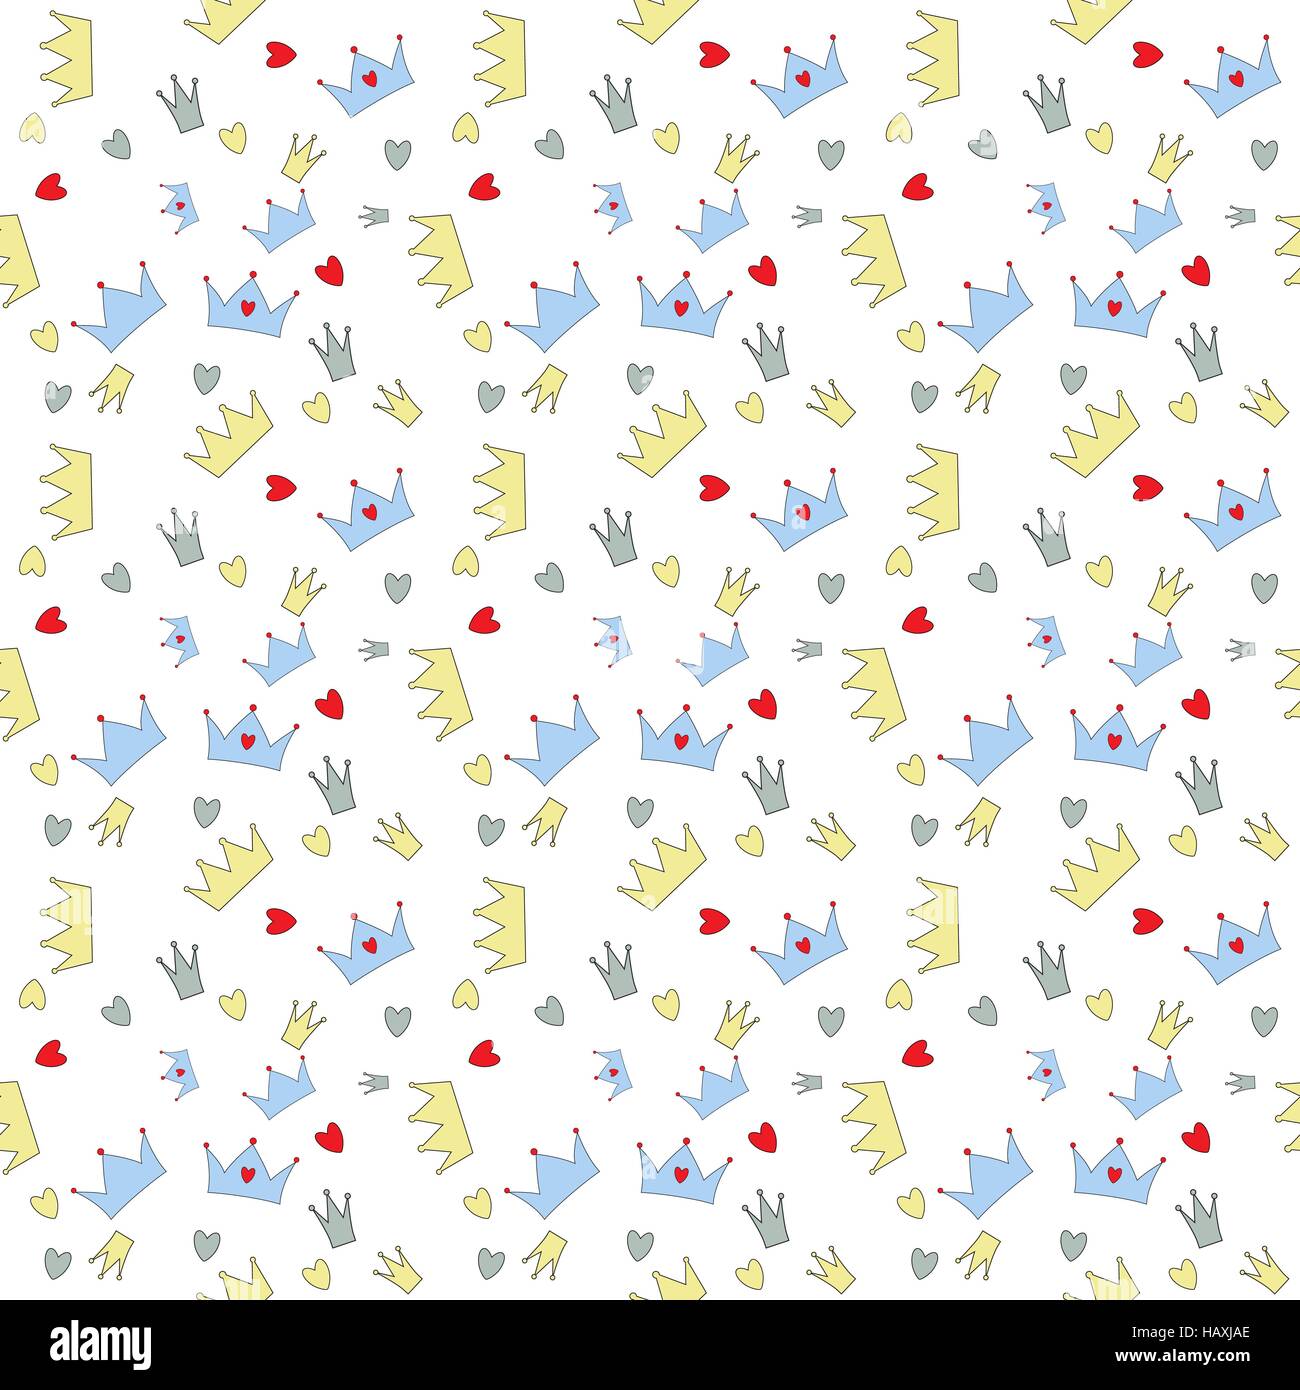 Prince Seamless Pattern Background Vector Illustration Stock Vector ...